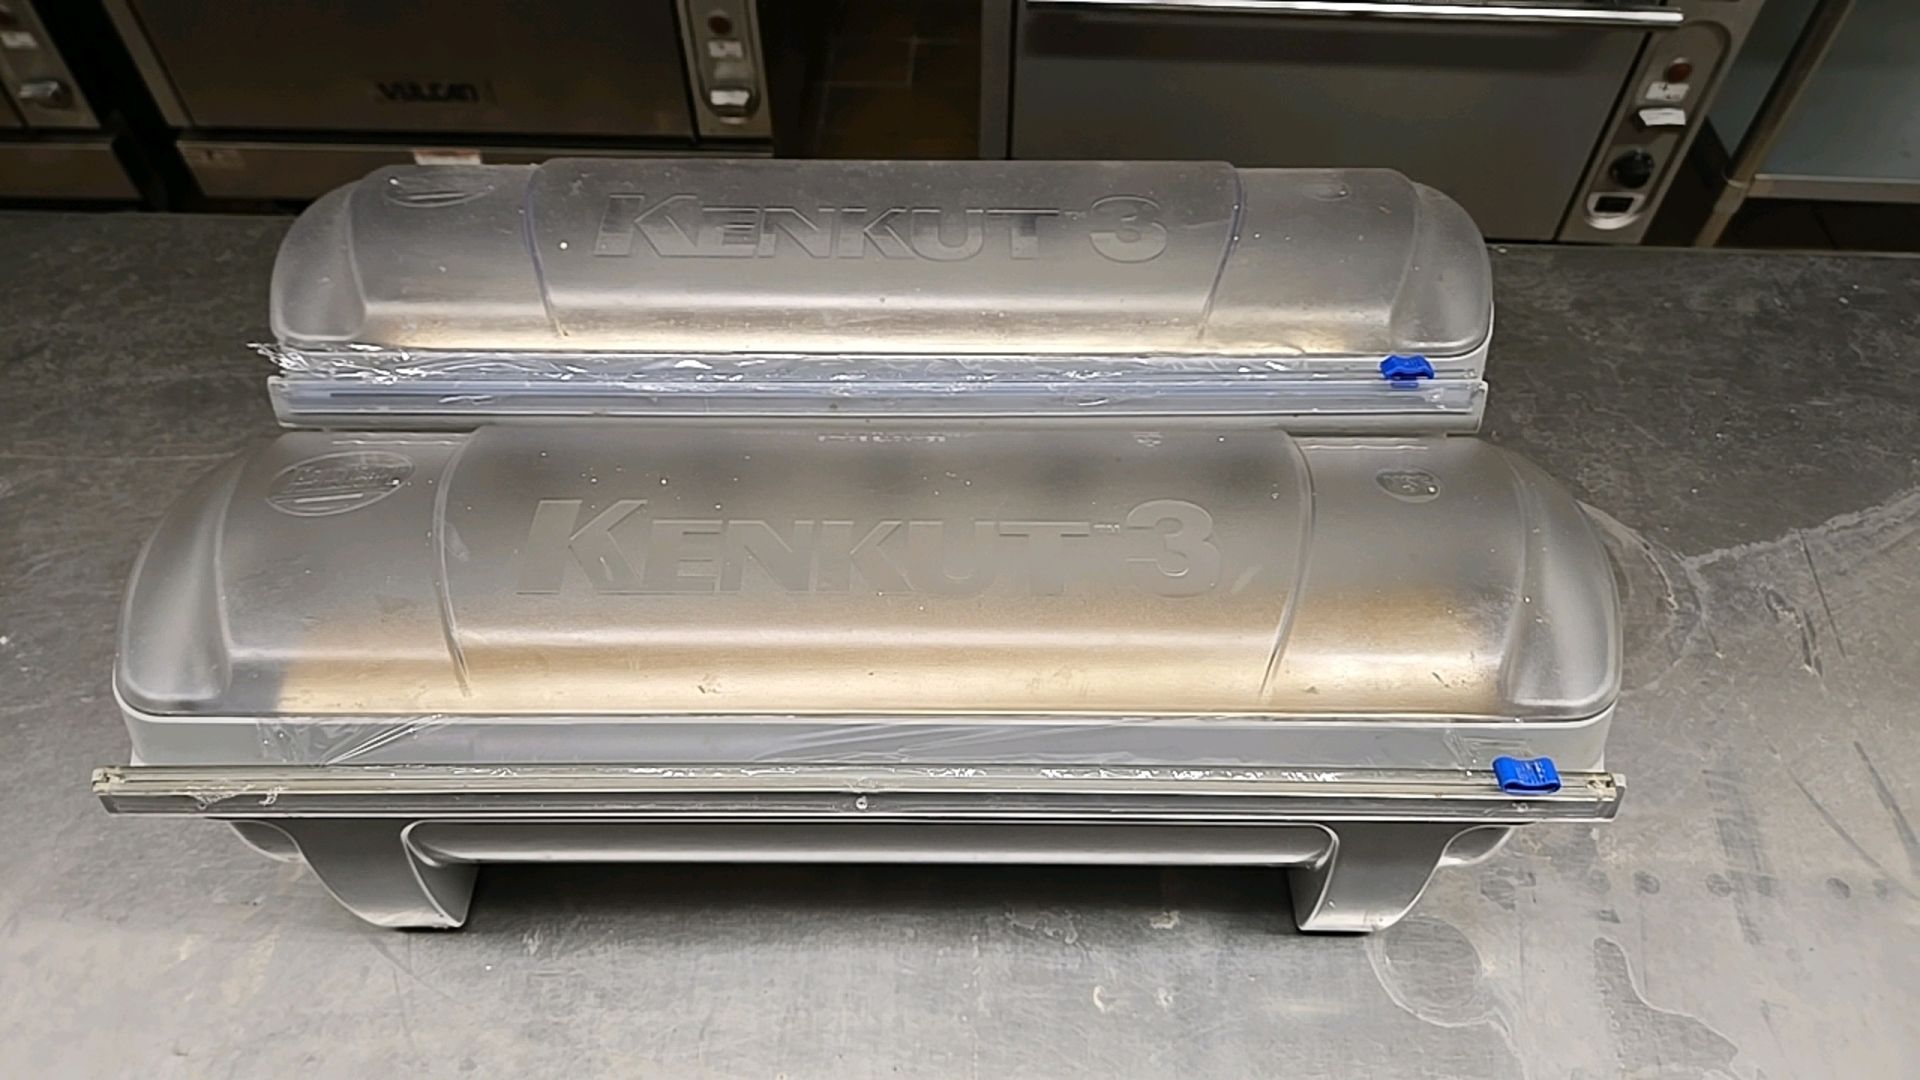 KENKUT ASSORTED SAFETY & SANITATION DISPENSERS FOR PLASTIC AND FOIL, QTY. (2)